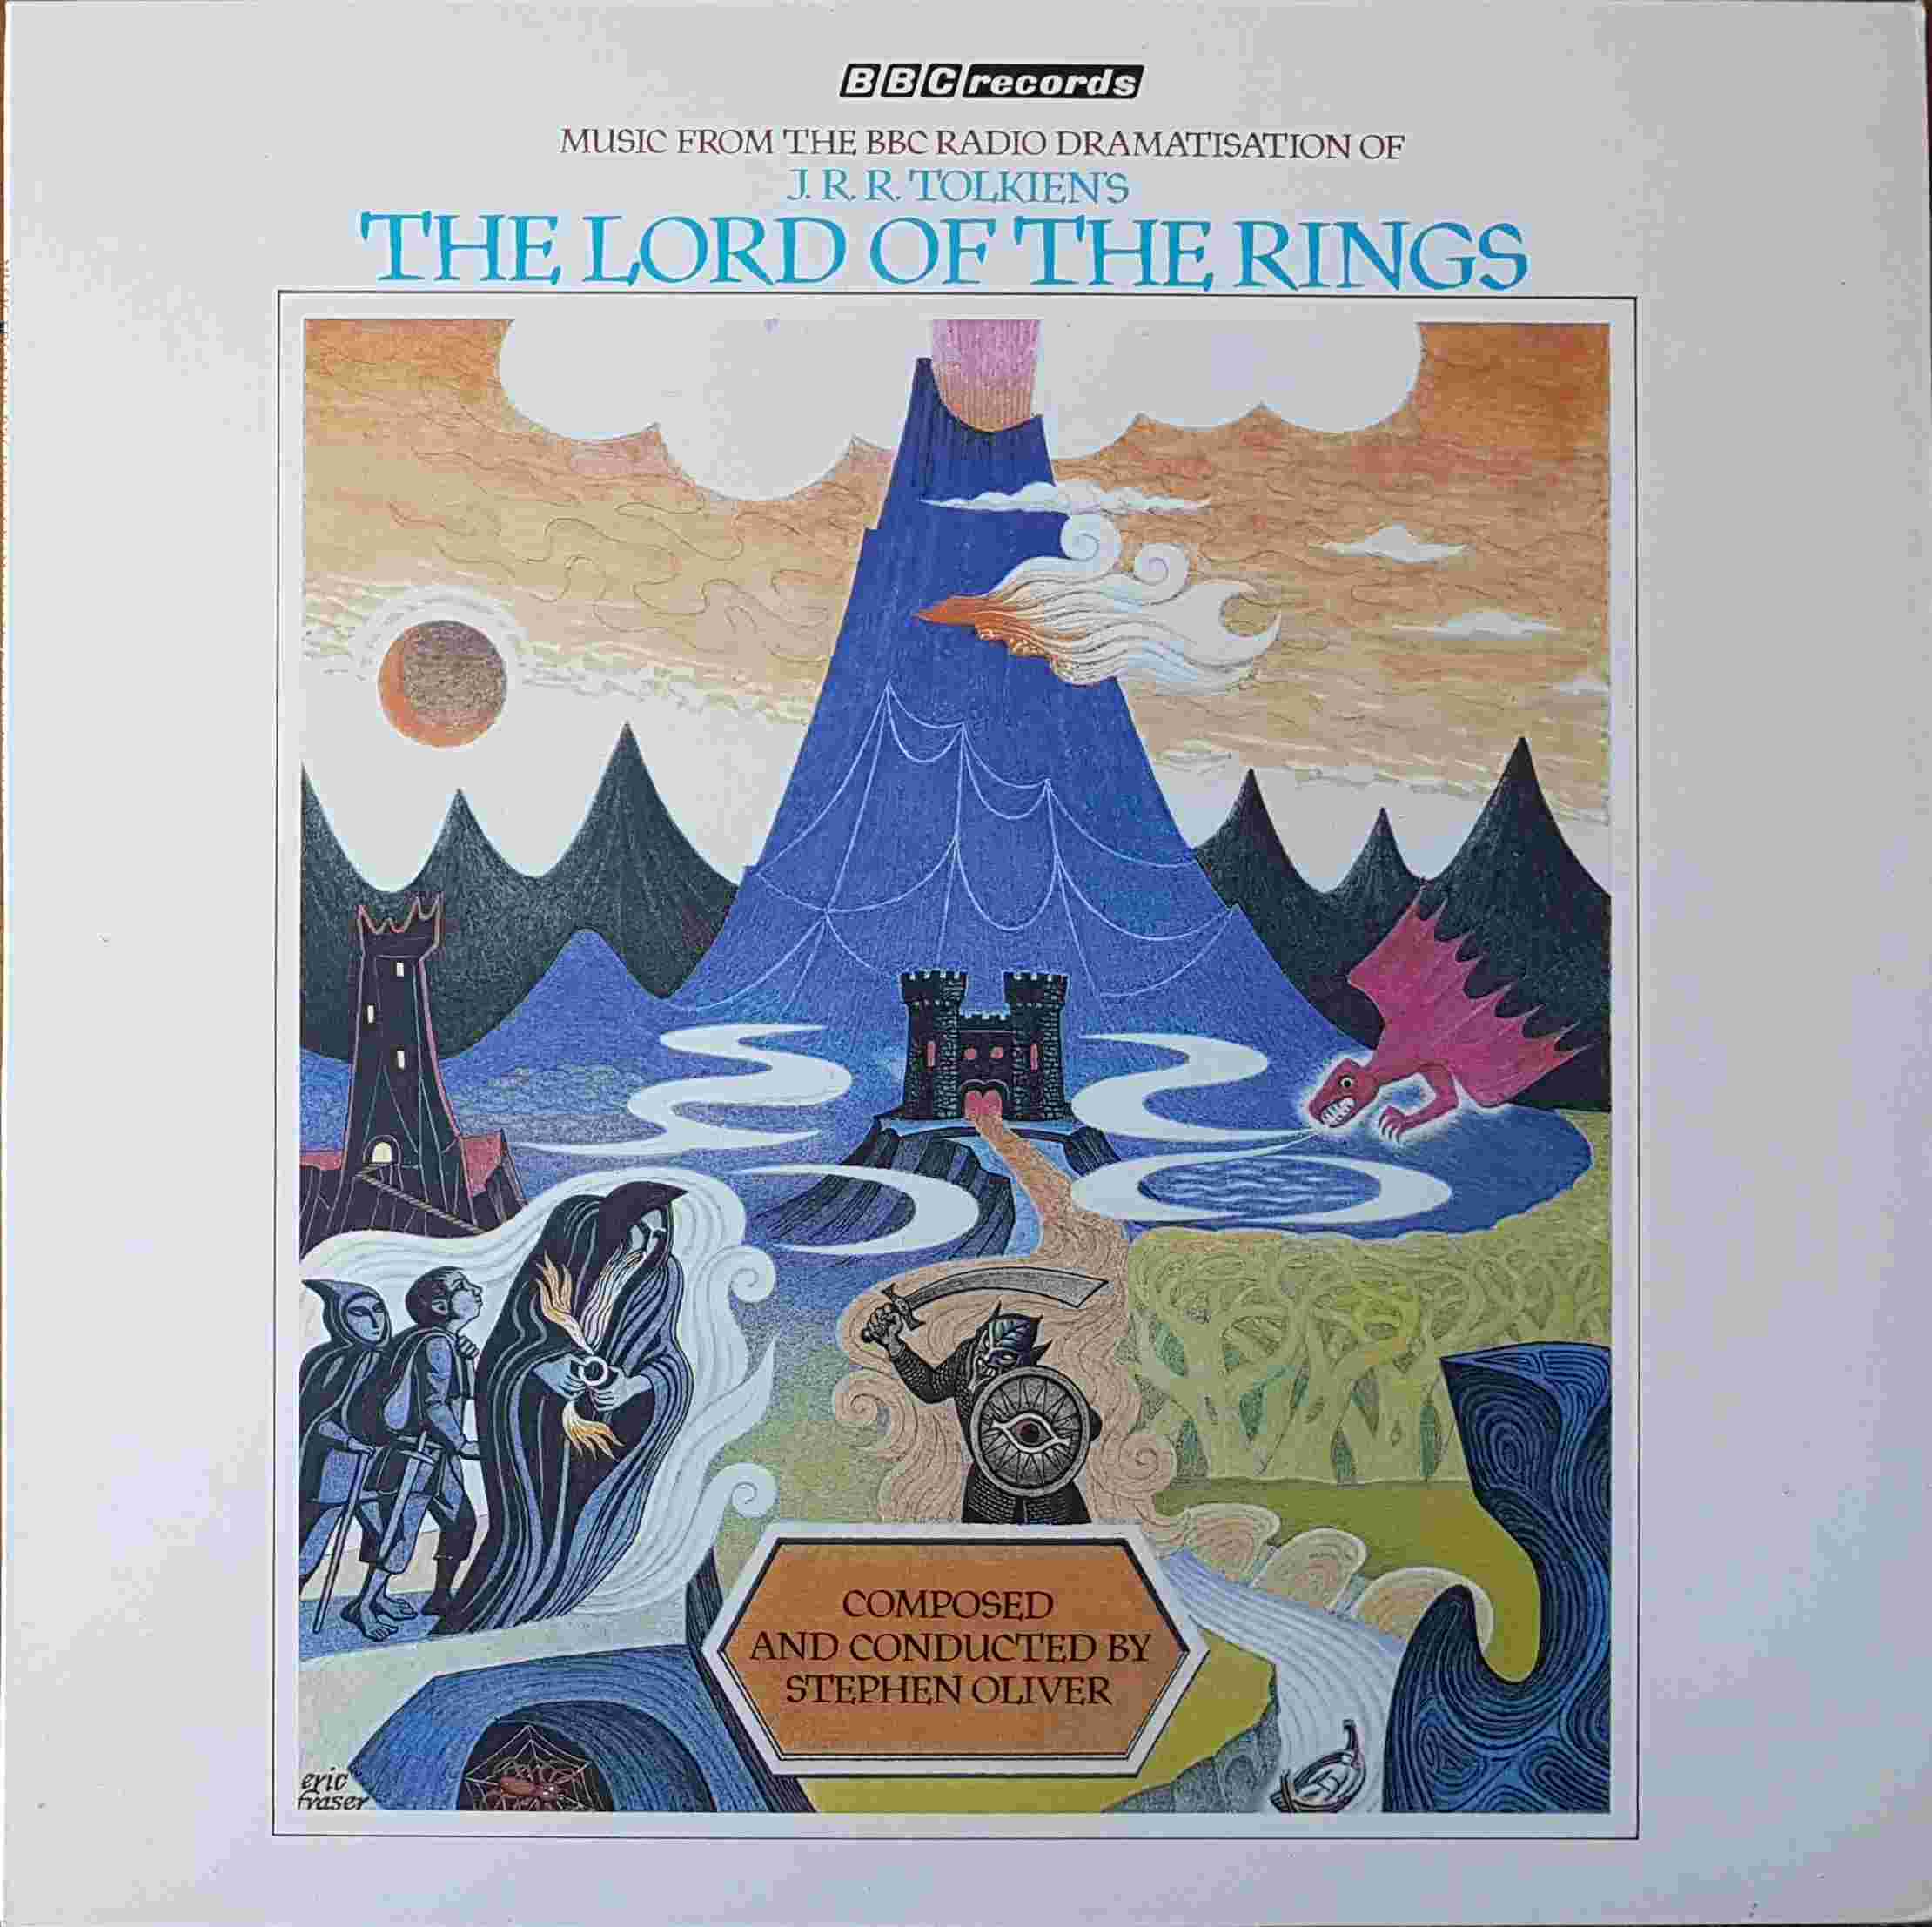 Picture of REH 415 The lord of the rings by artist Stephen Oliver from the BBC albums - Records and Tapes library